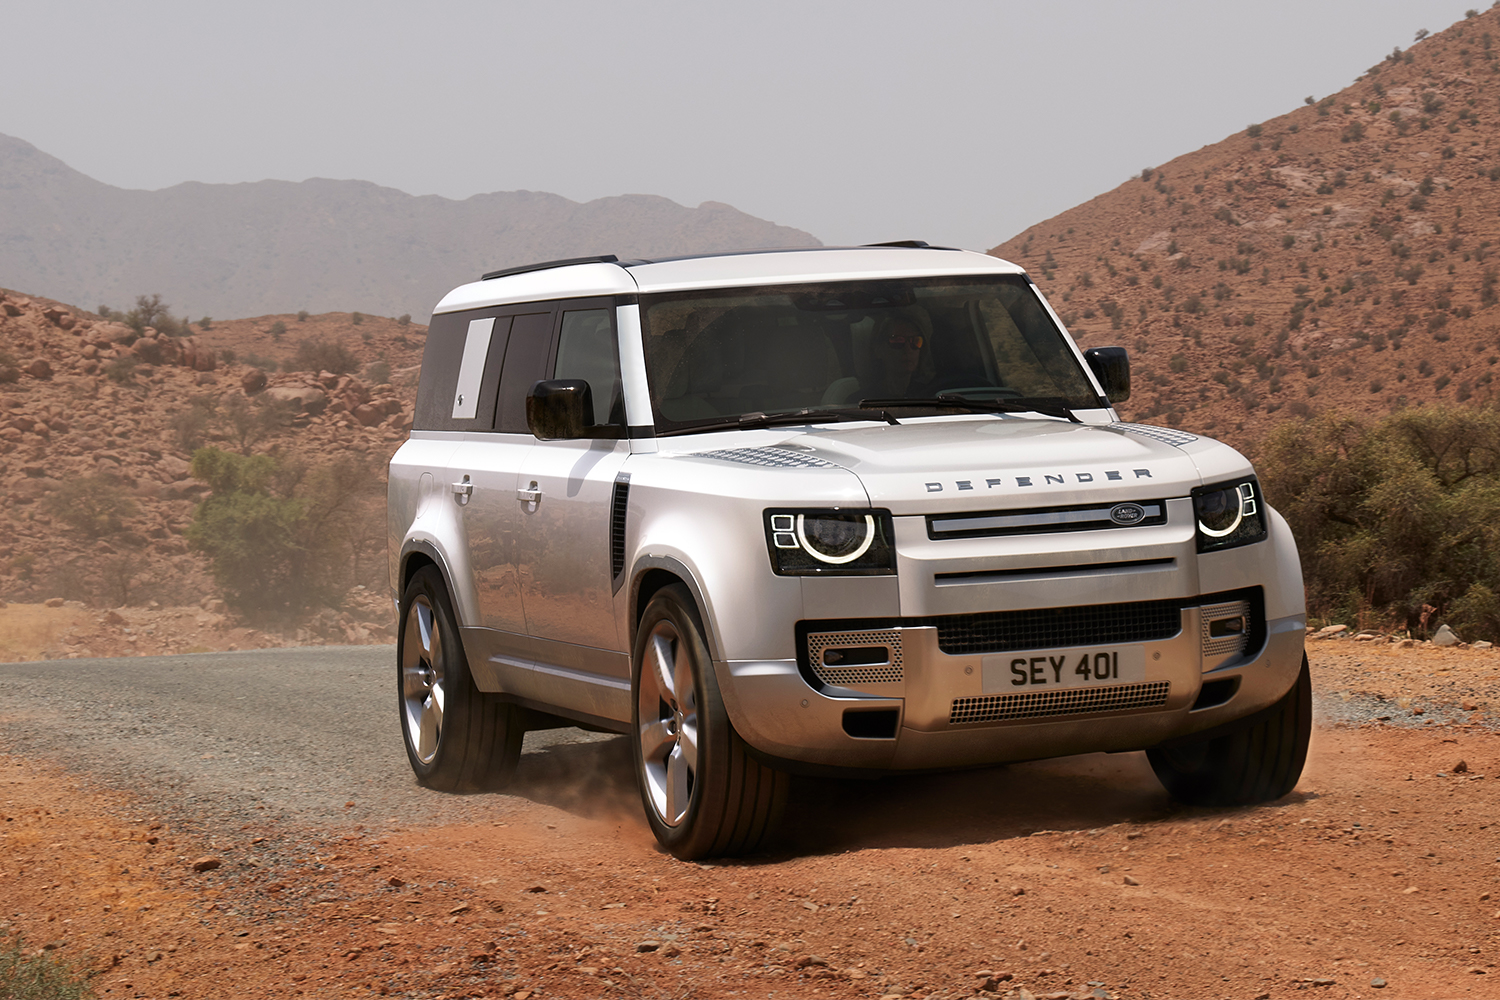 Review: Land Rover Defender 130, Family SUV, Off-Road Chops